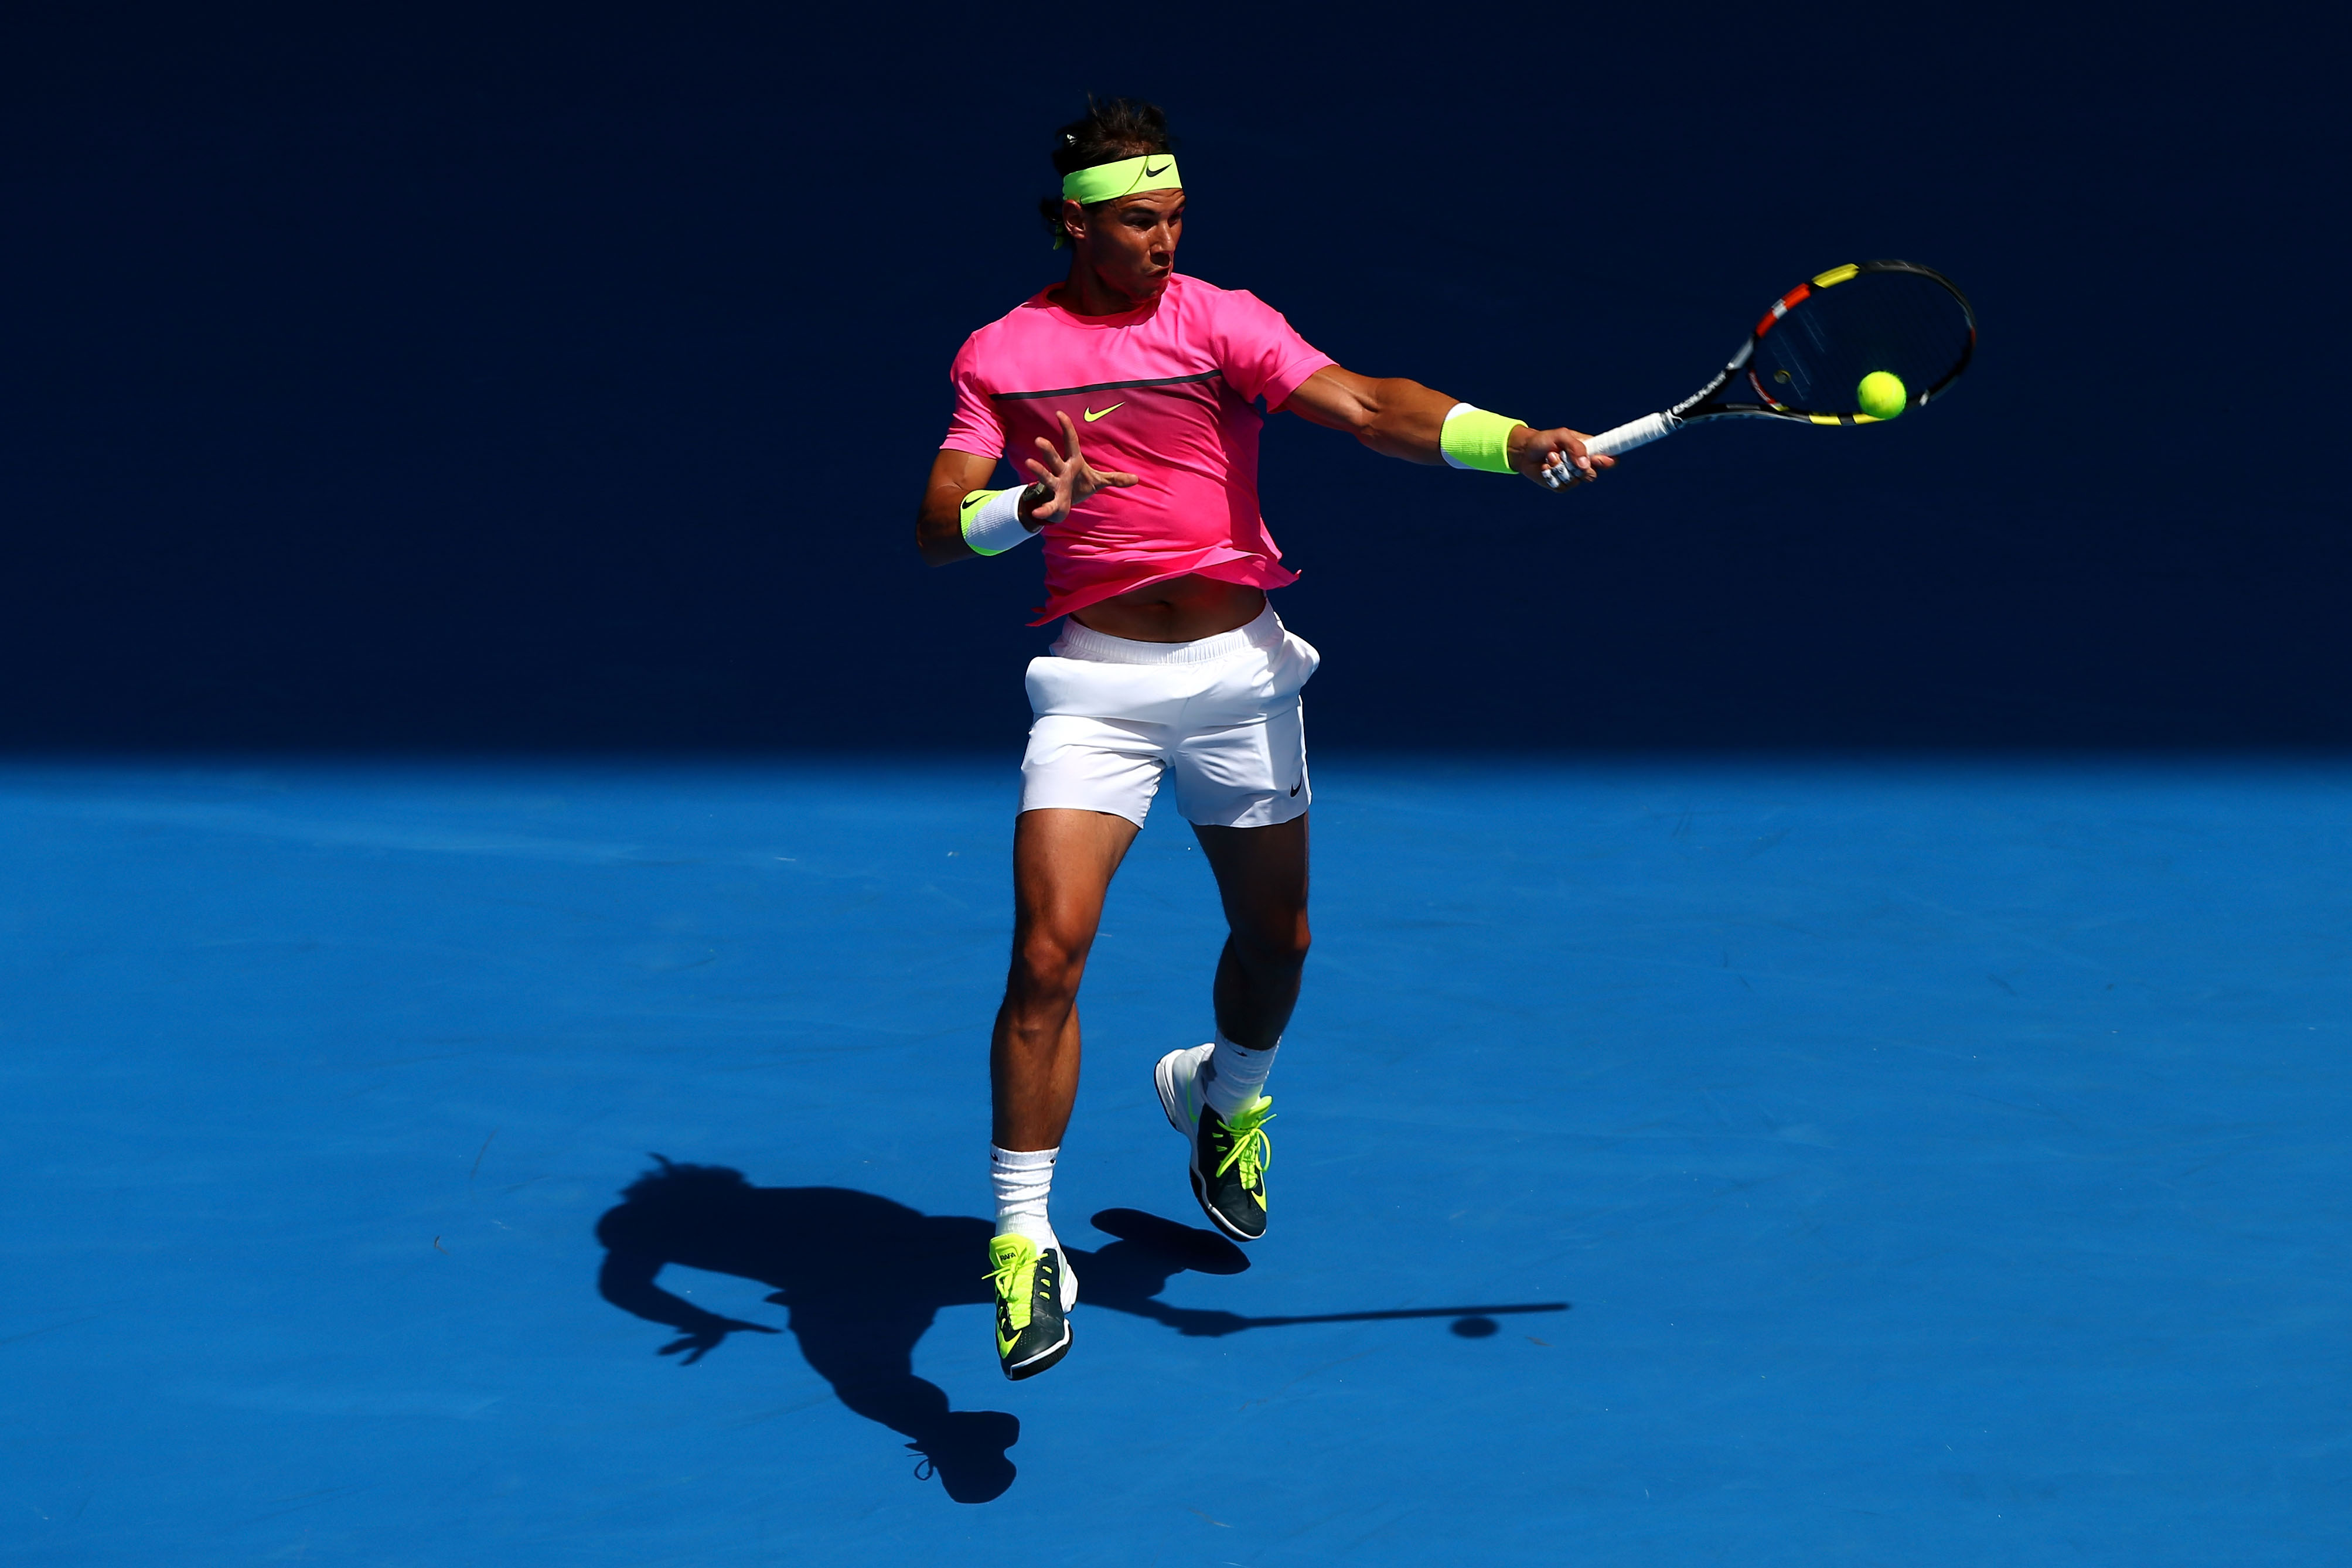 Rafael Nadal wore a bright pink shirt and shortshorts in Aussie Open